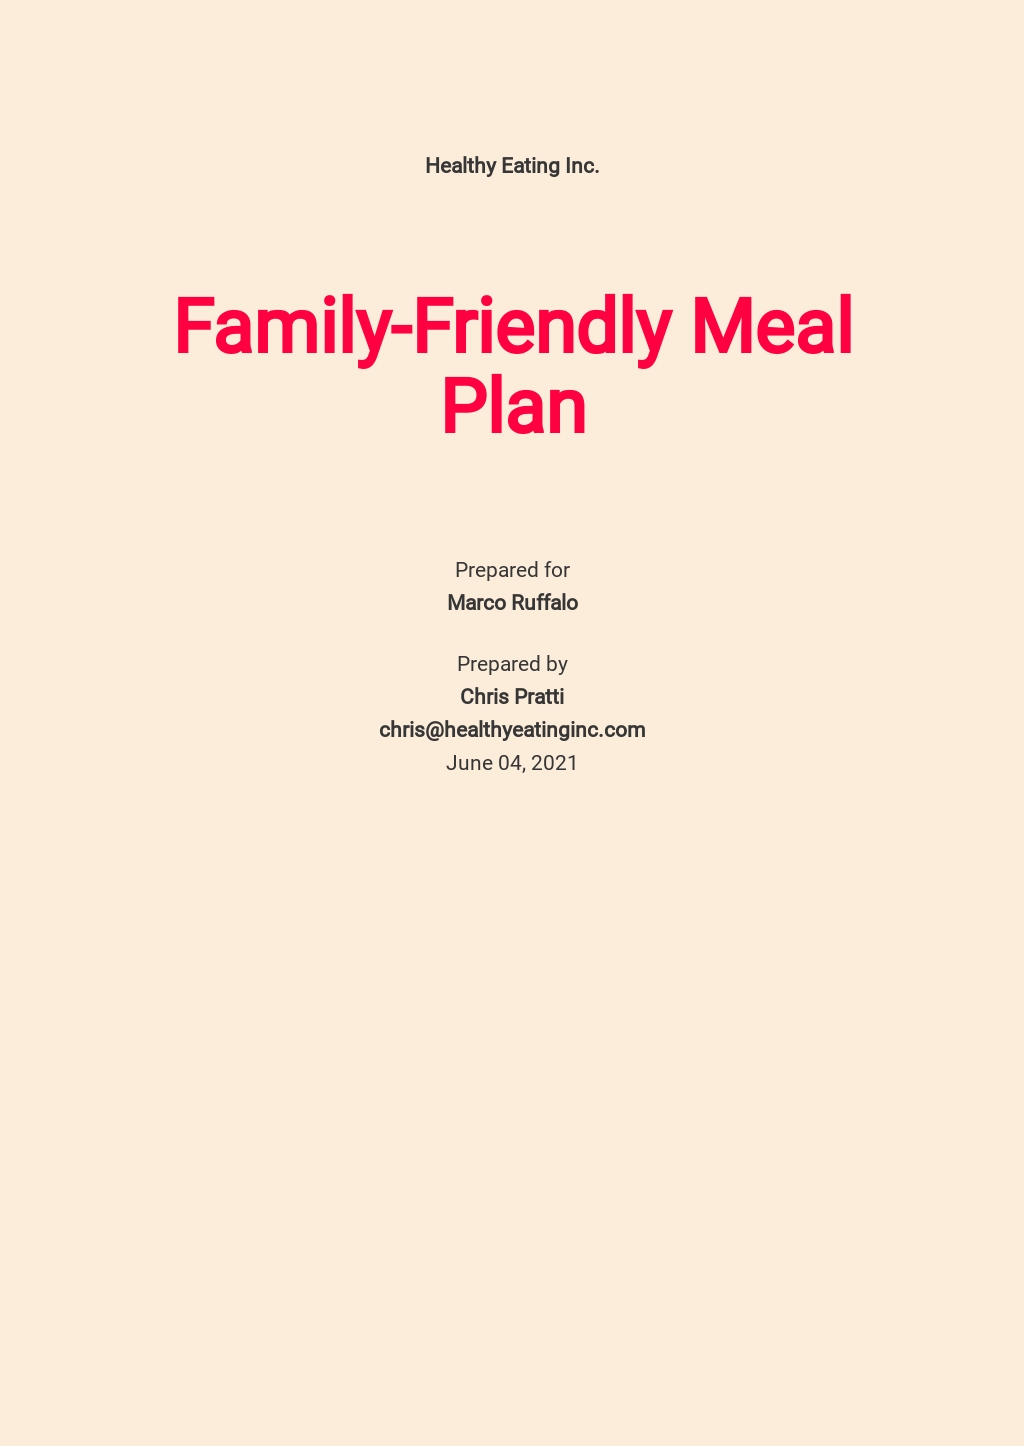 Free Meal Plan Word Templates 20  Download Template net